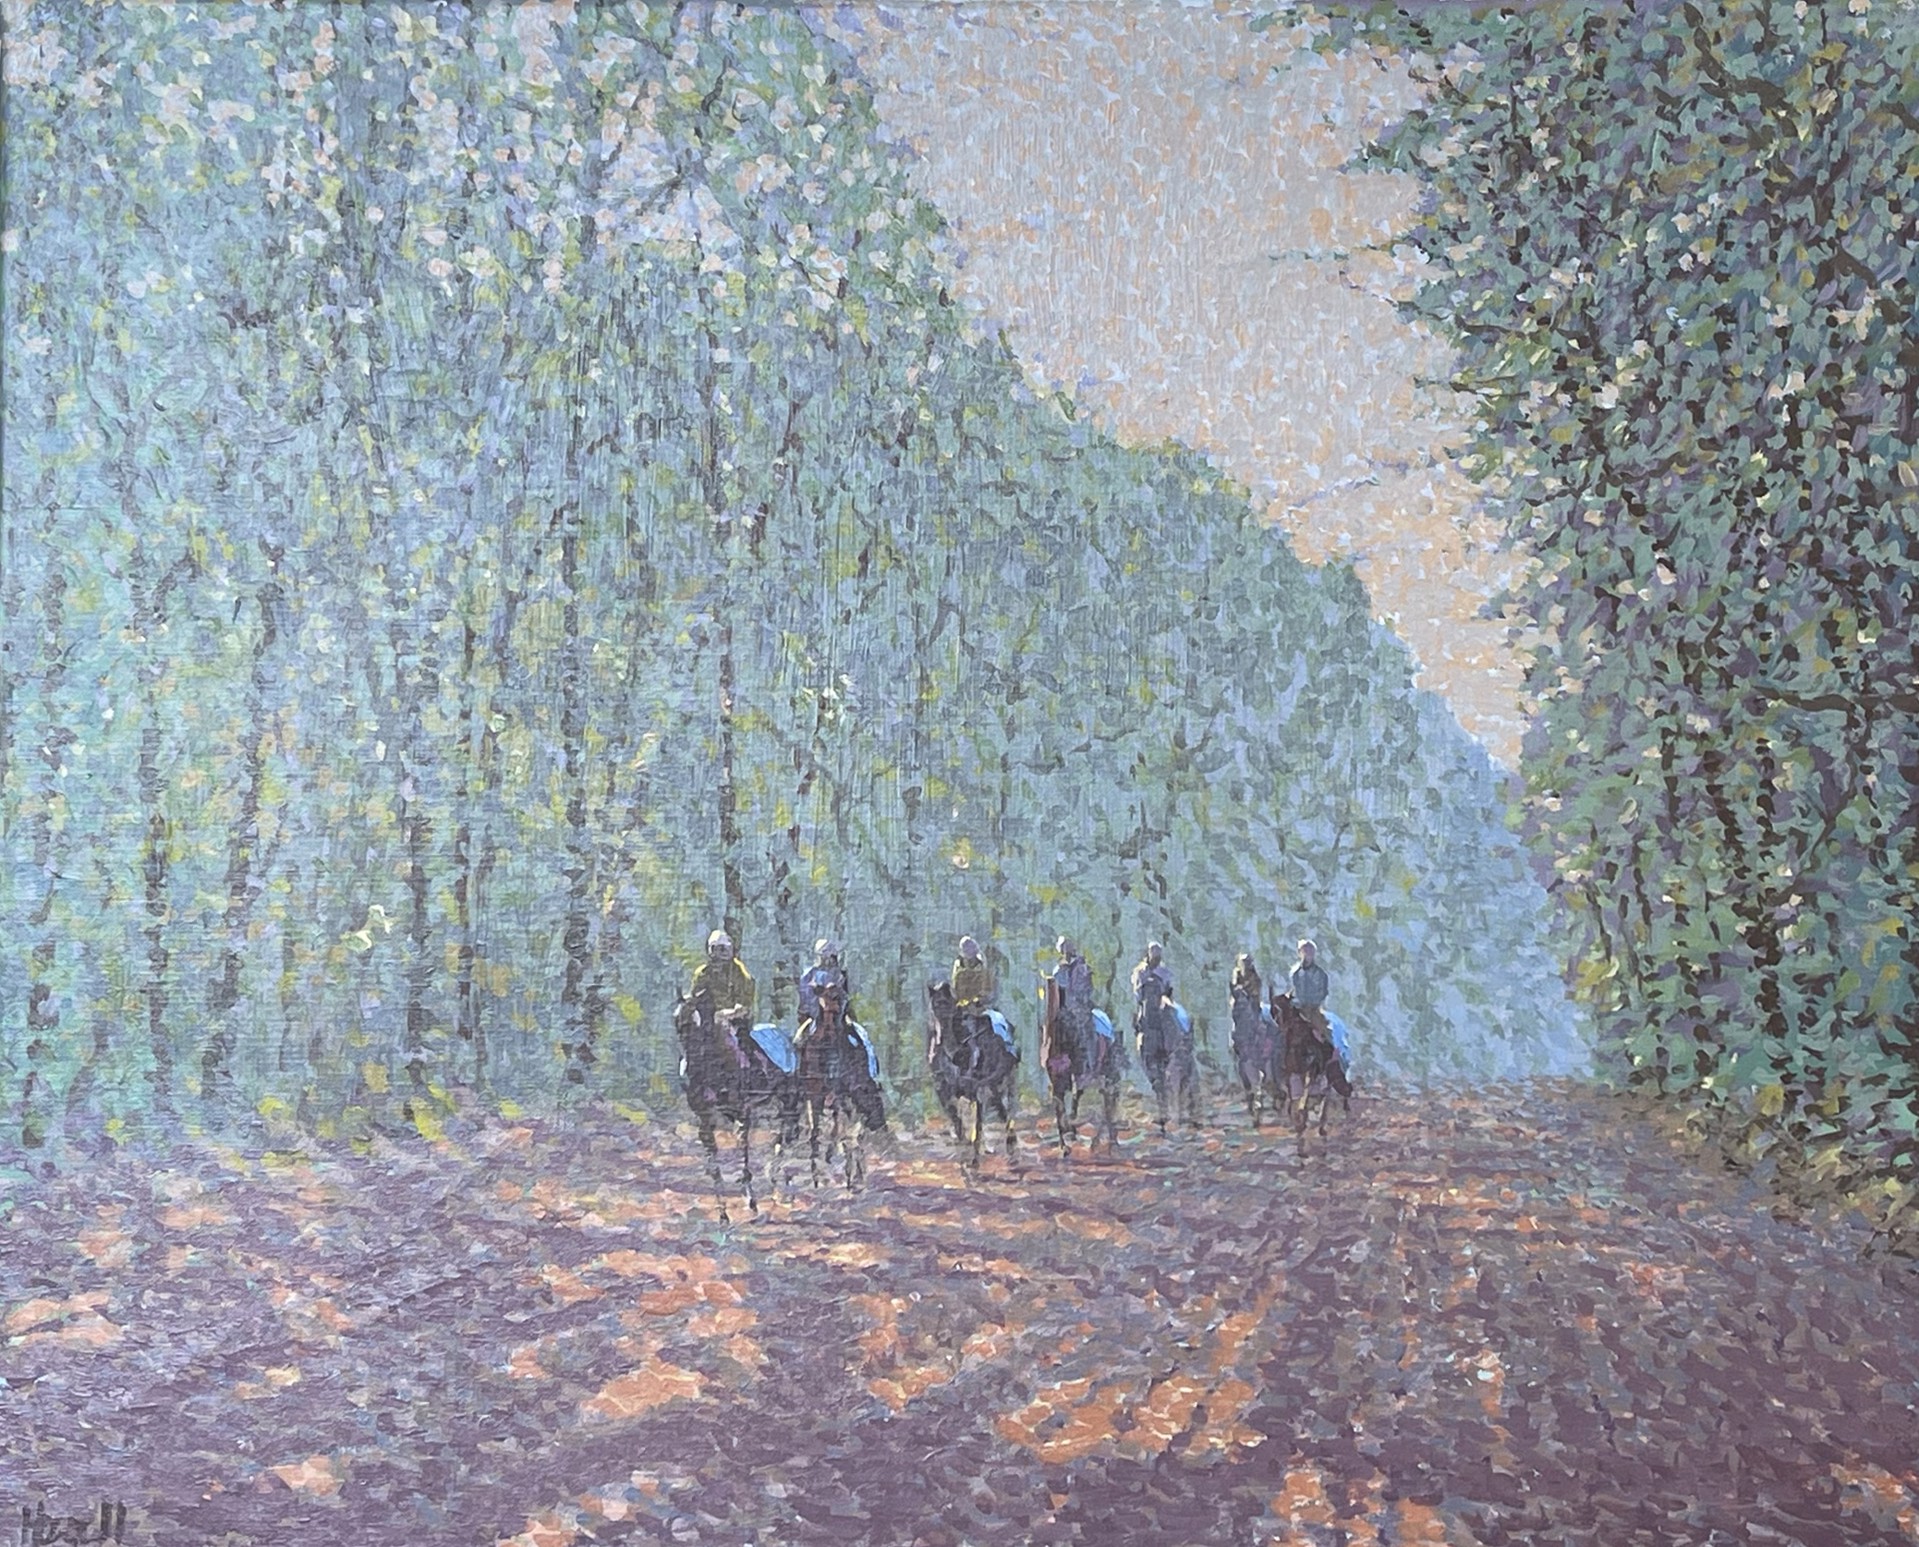 Through the Chantilly Woods by Peter Howell